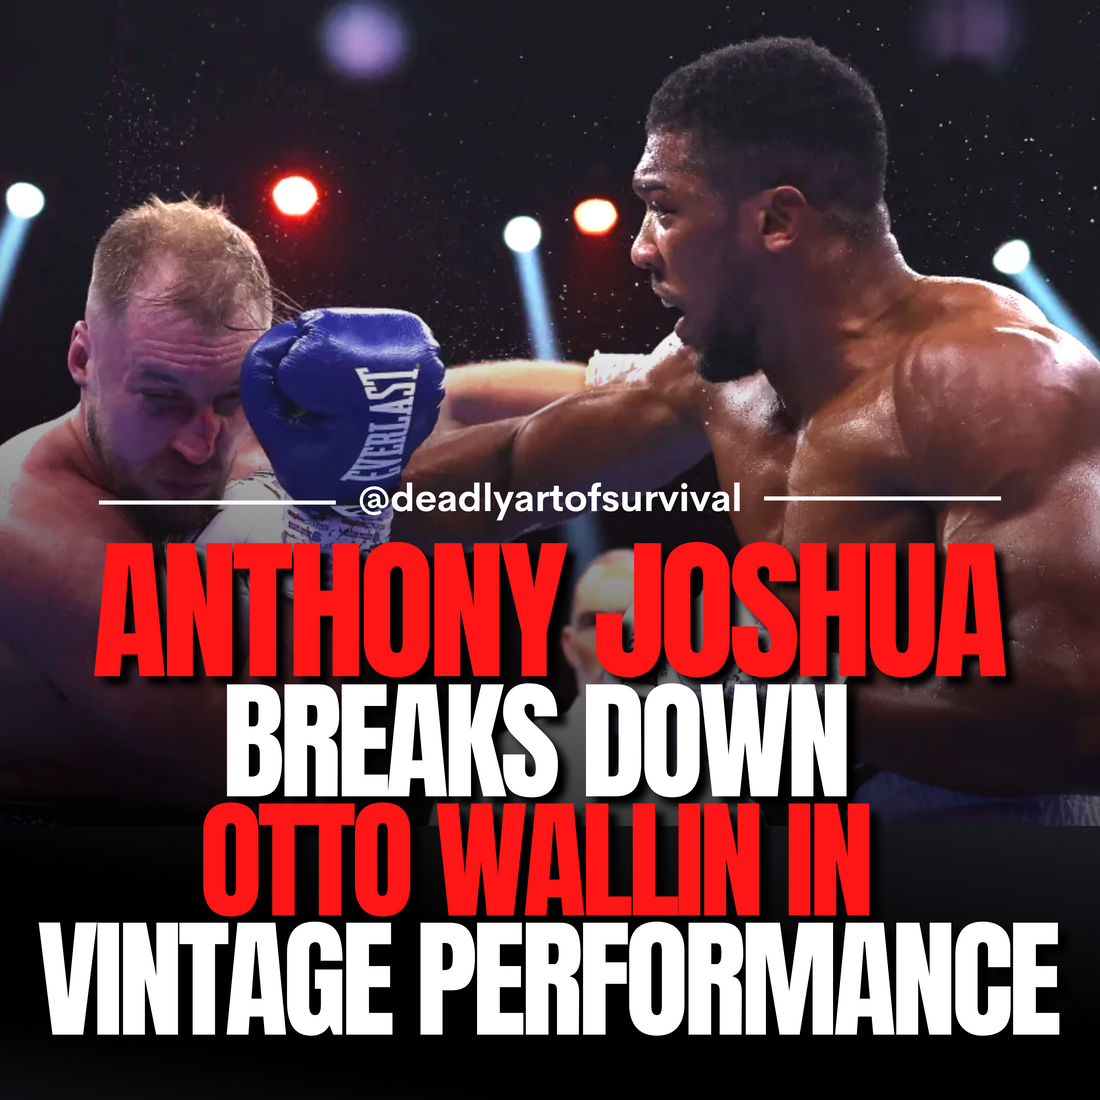 Weekend Review: Anthony Joshua Dominates, Stops Otto Wallin in Vintage Performance